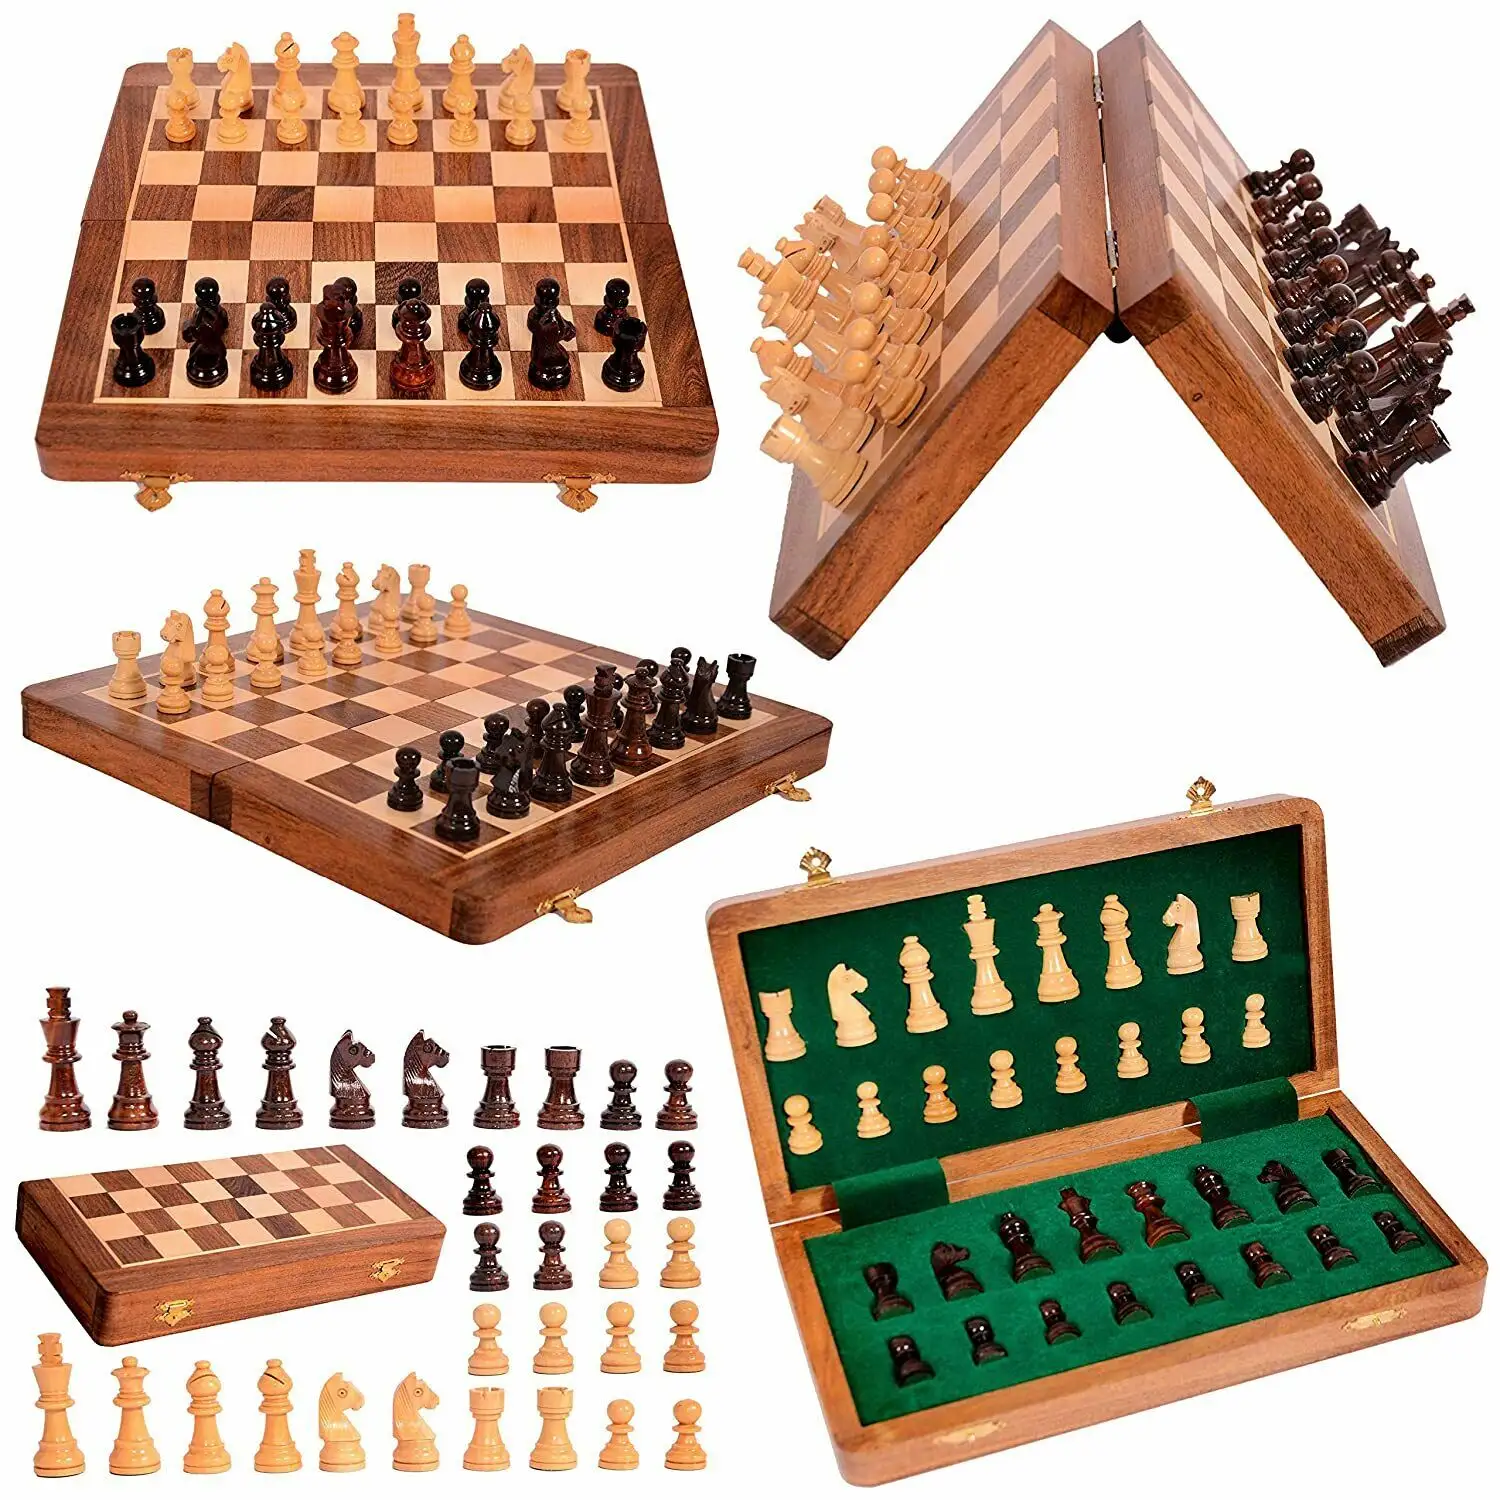 Chess Board Luxury Antique Wooden Magnetic Chess Board Game Set With 2 Built-in Storage Drawers And Wooden